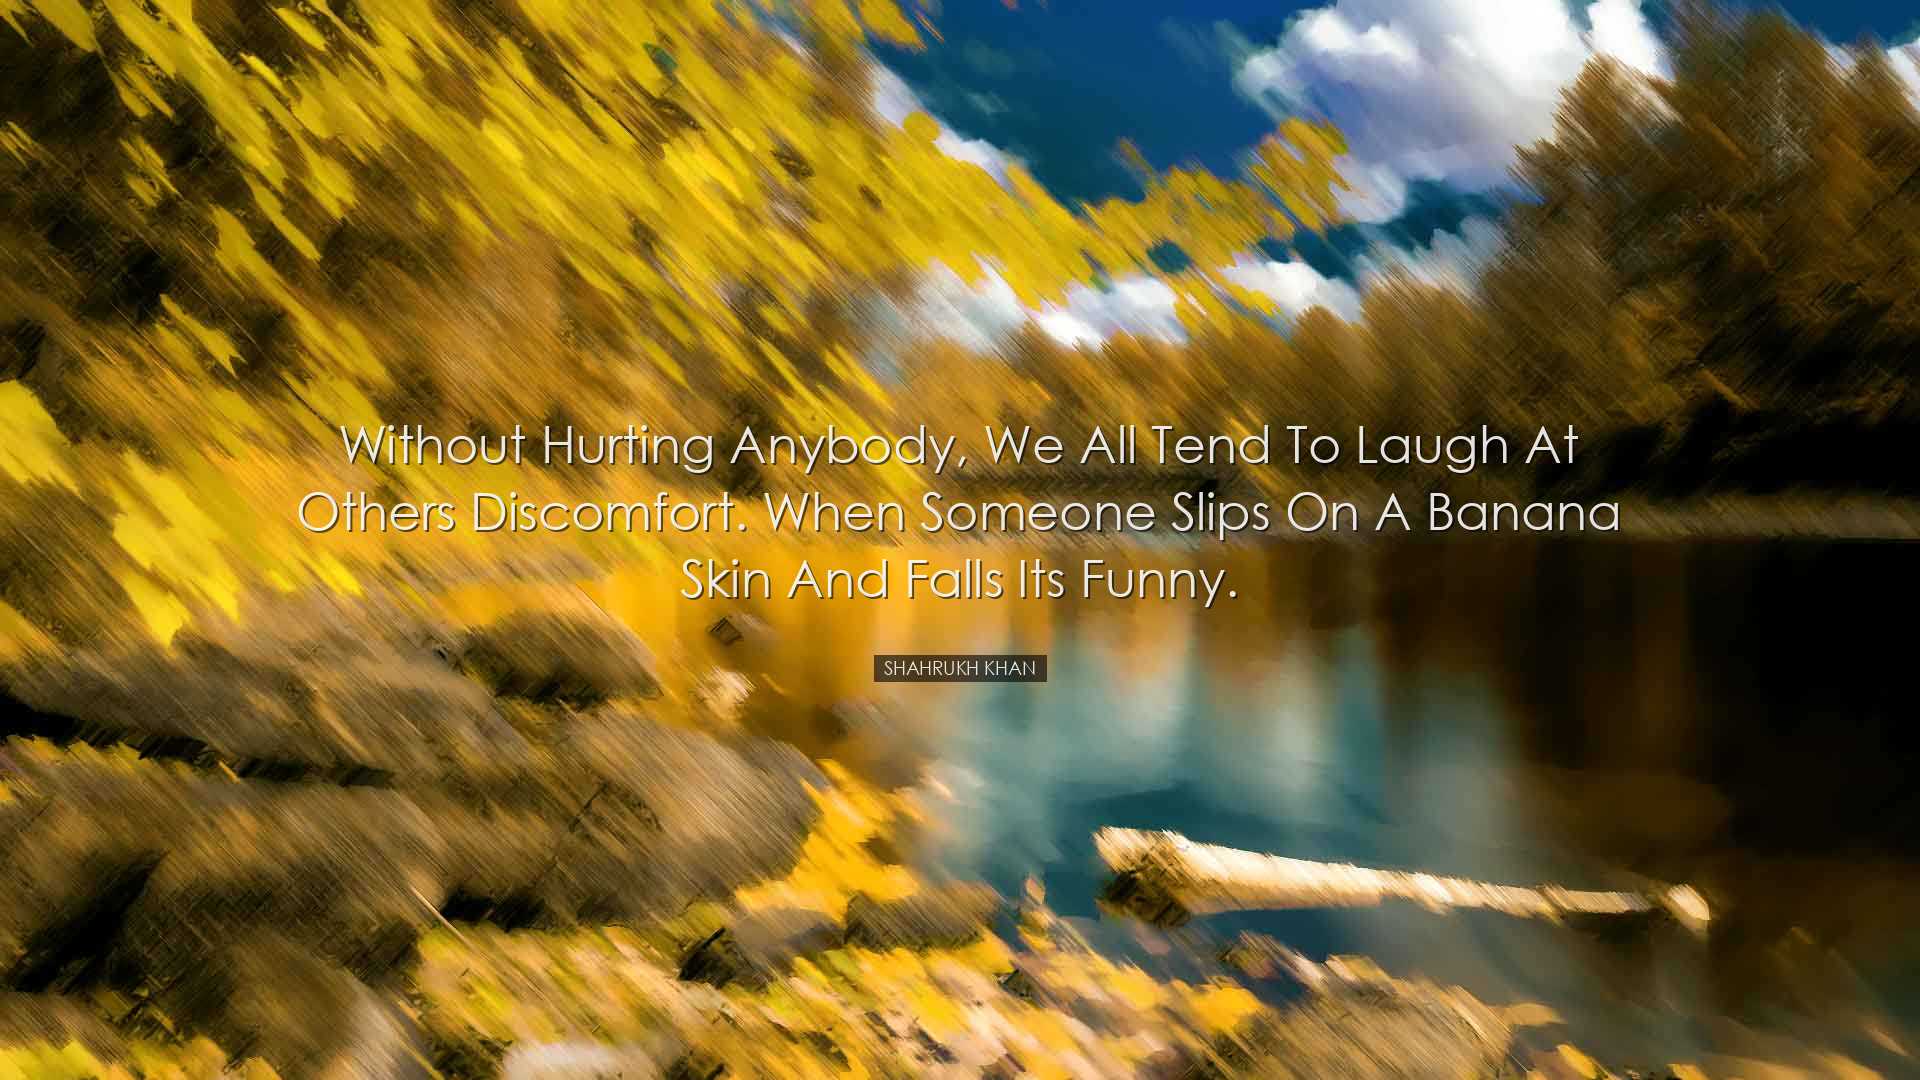 Without hurting anybody, we all tend to laugh at others discomfort